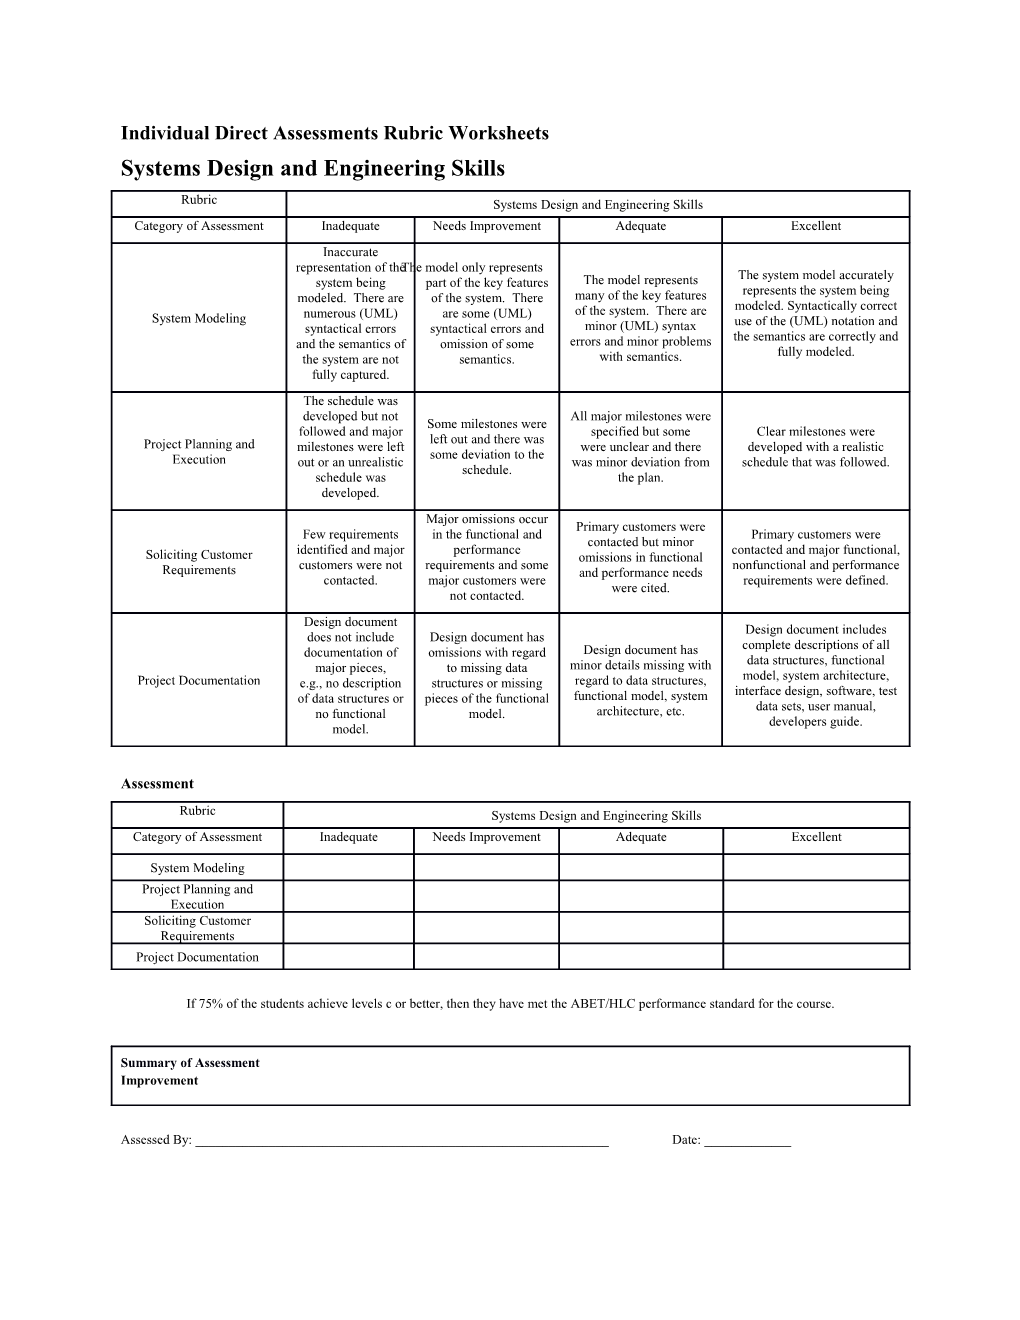 Individual Direct Assessments Rubric Worksheets